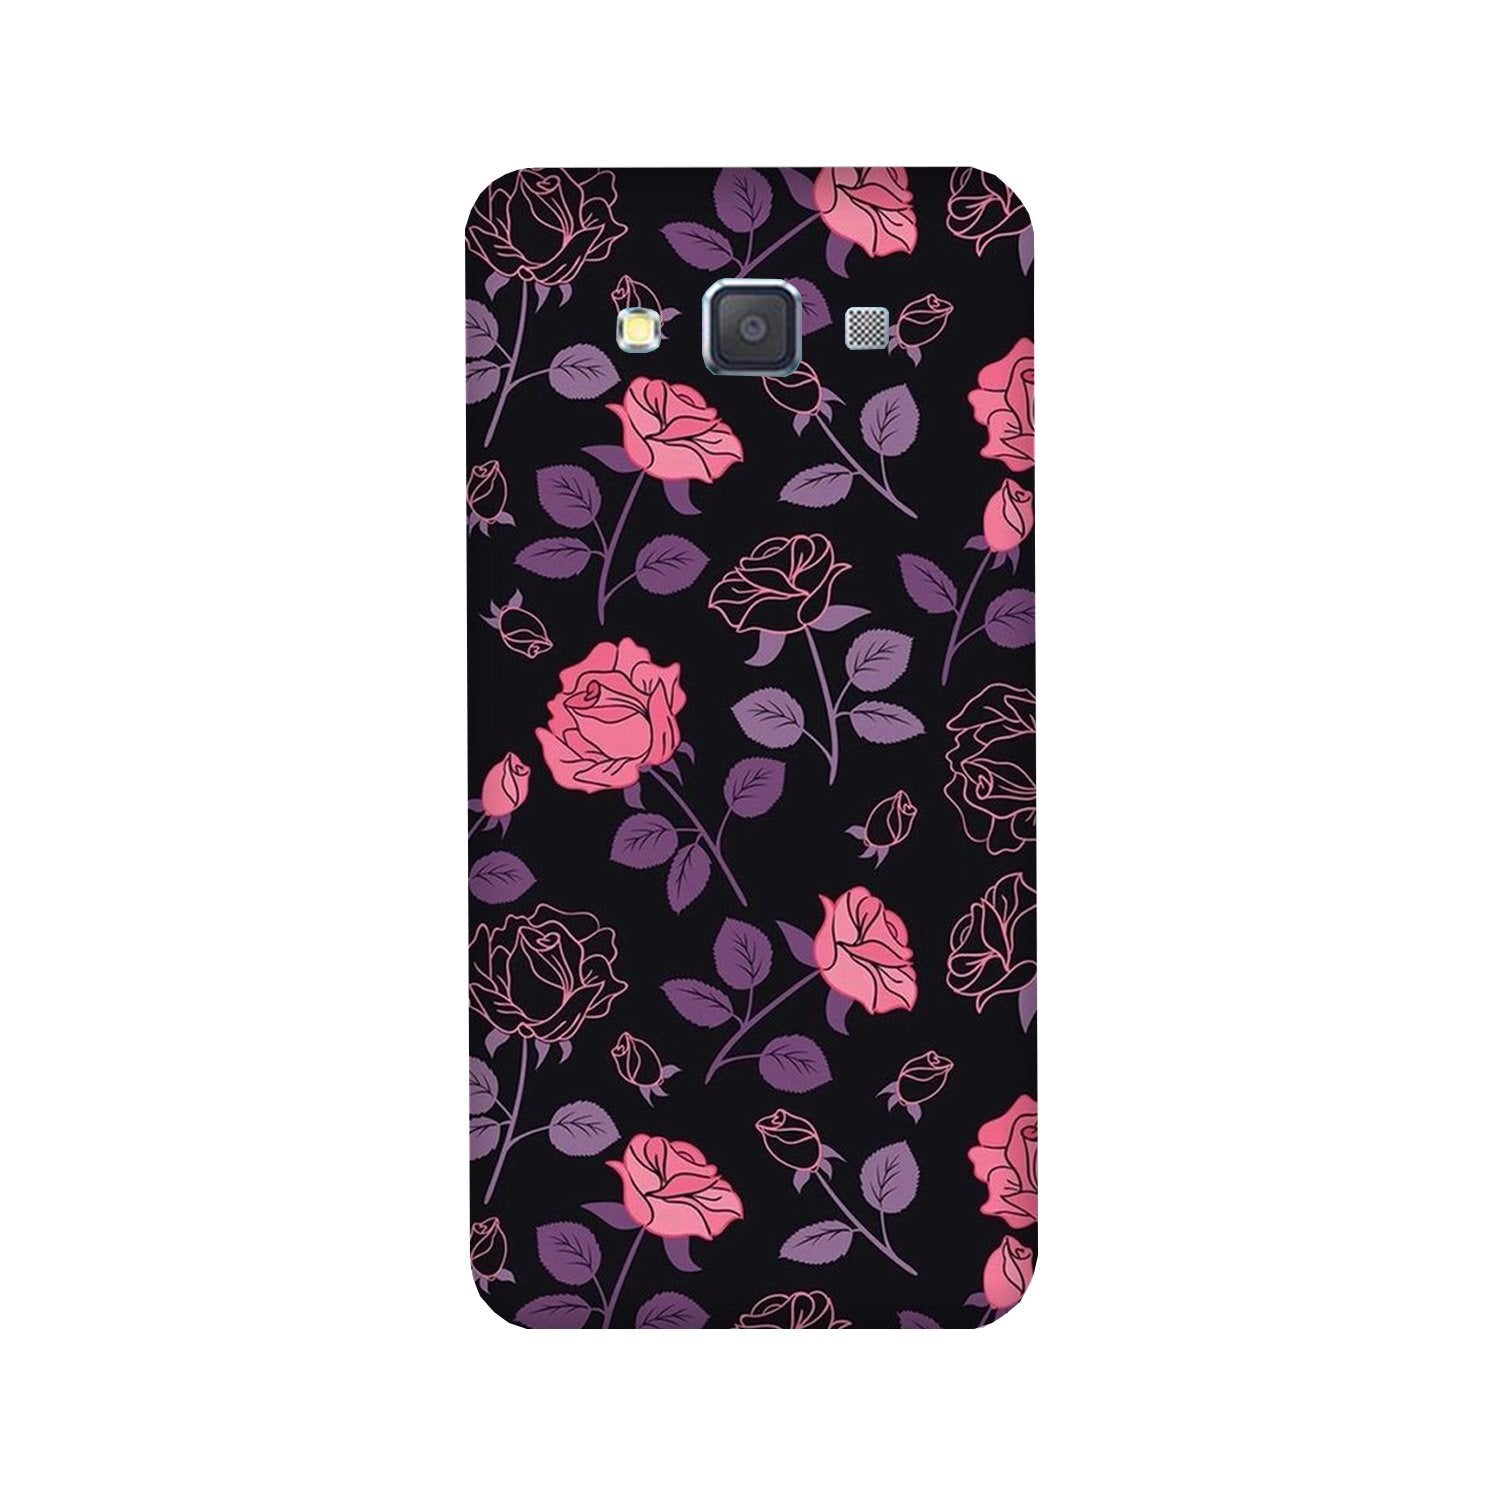 Rose Black Background Case for Galaxy Grand Prime